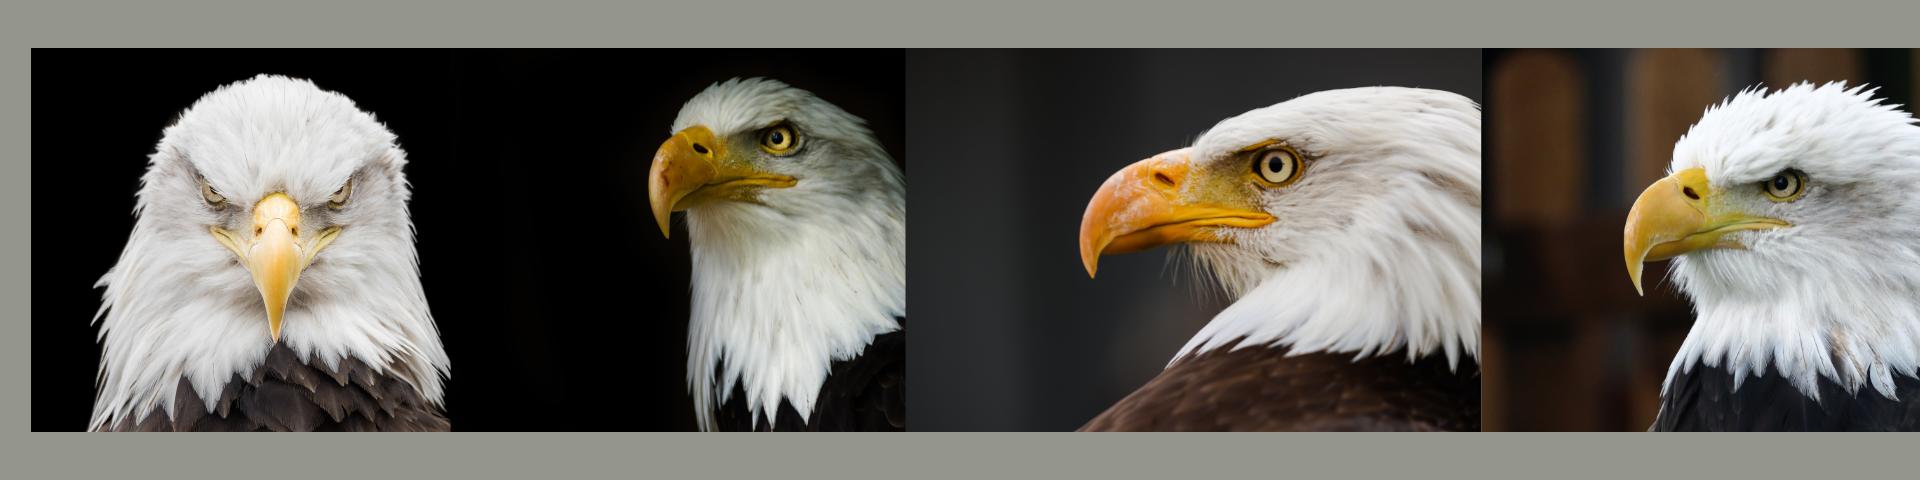 Image for Flights of Fancy: An Evening With the US Steel Bald Eagles